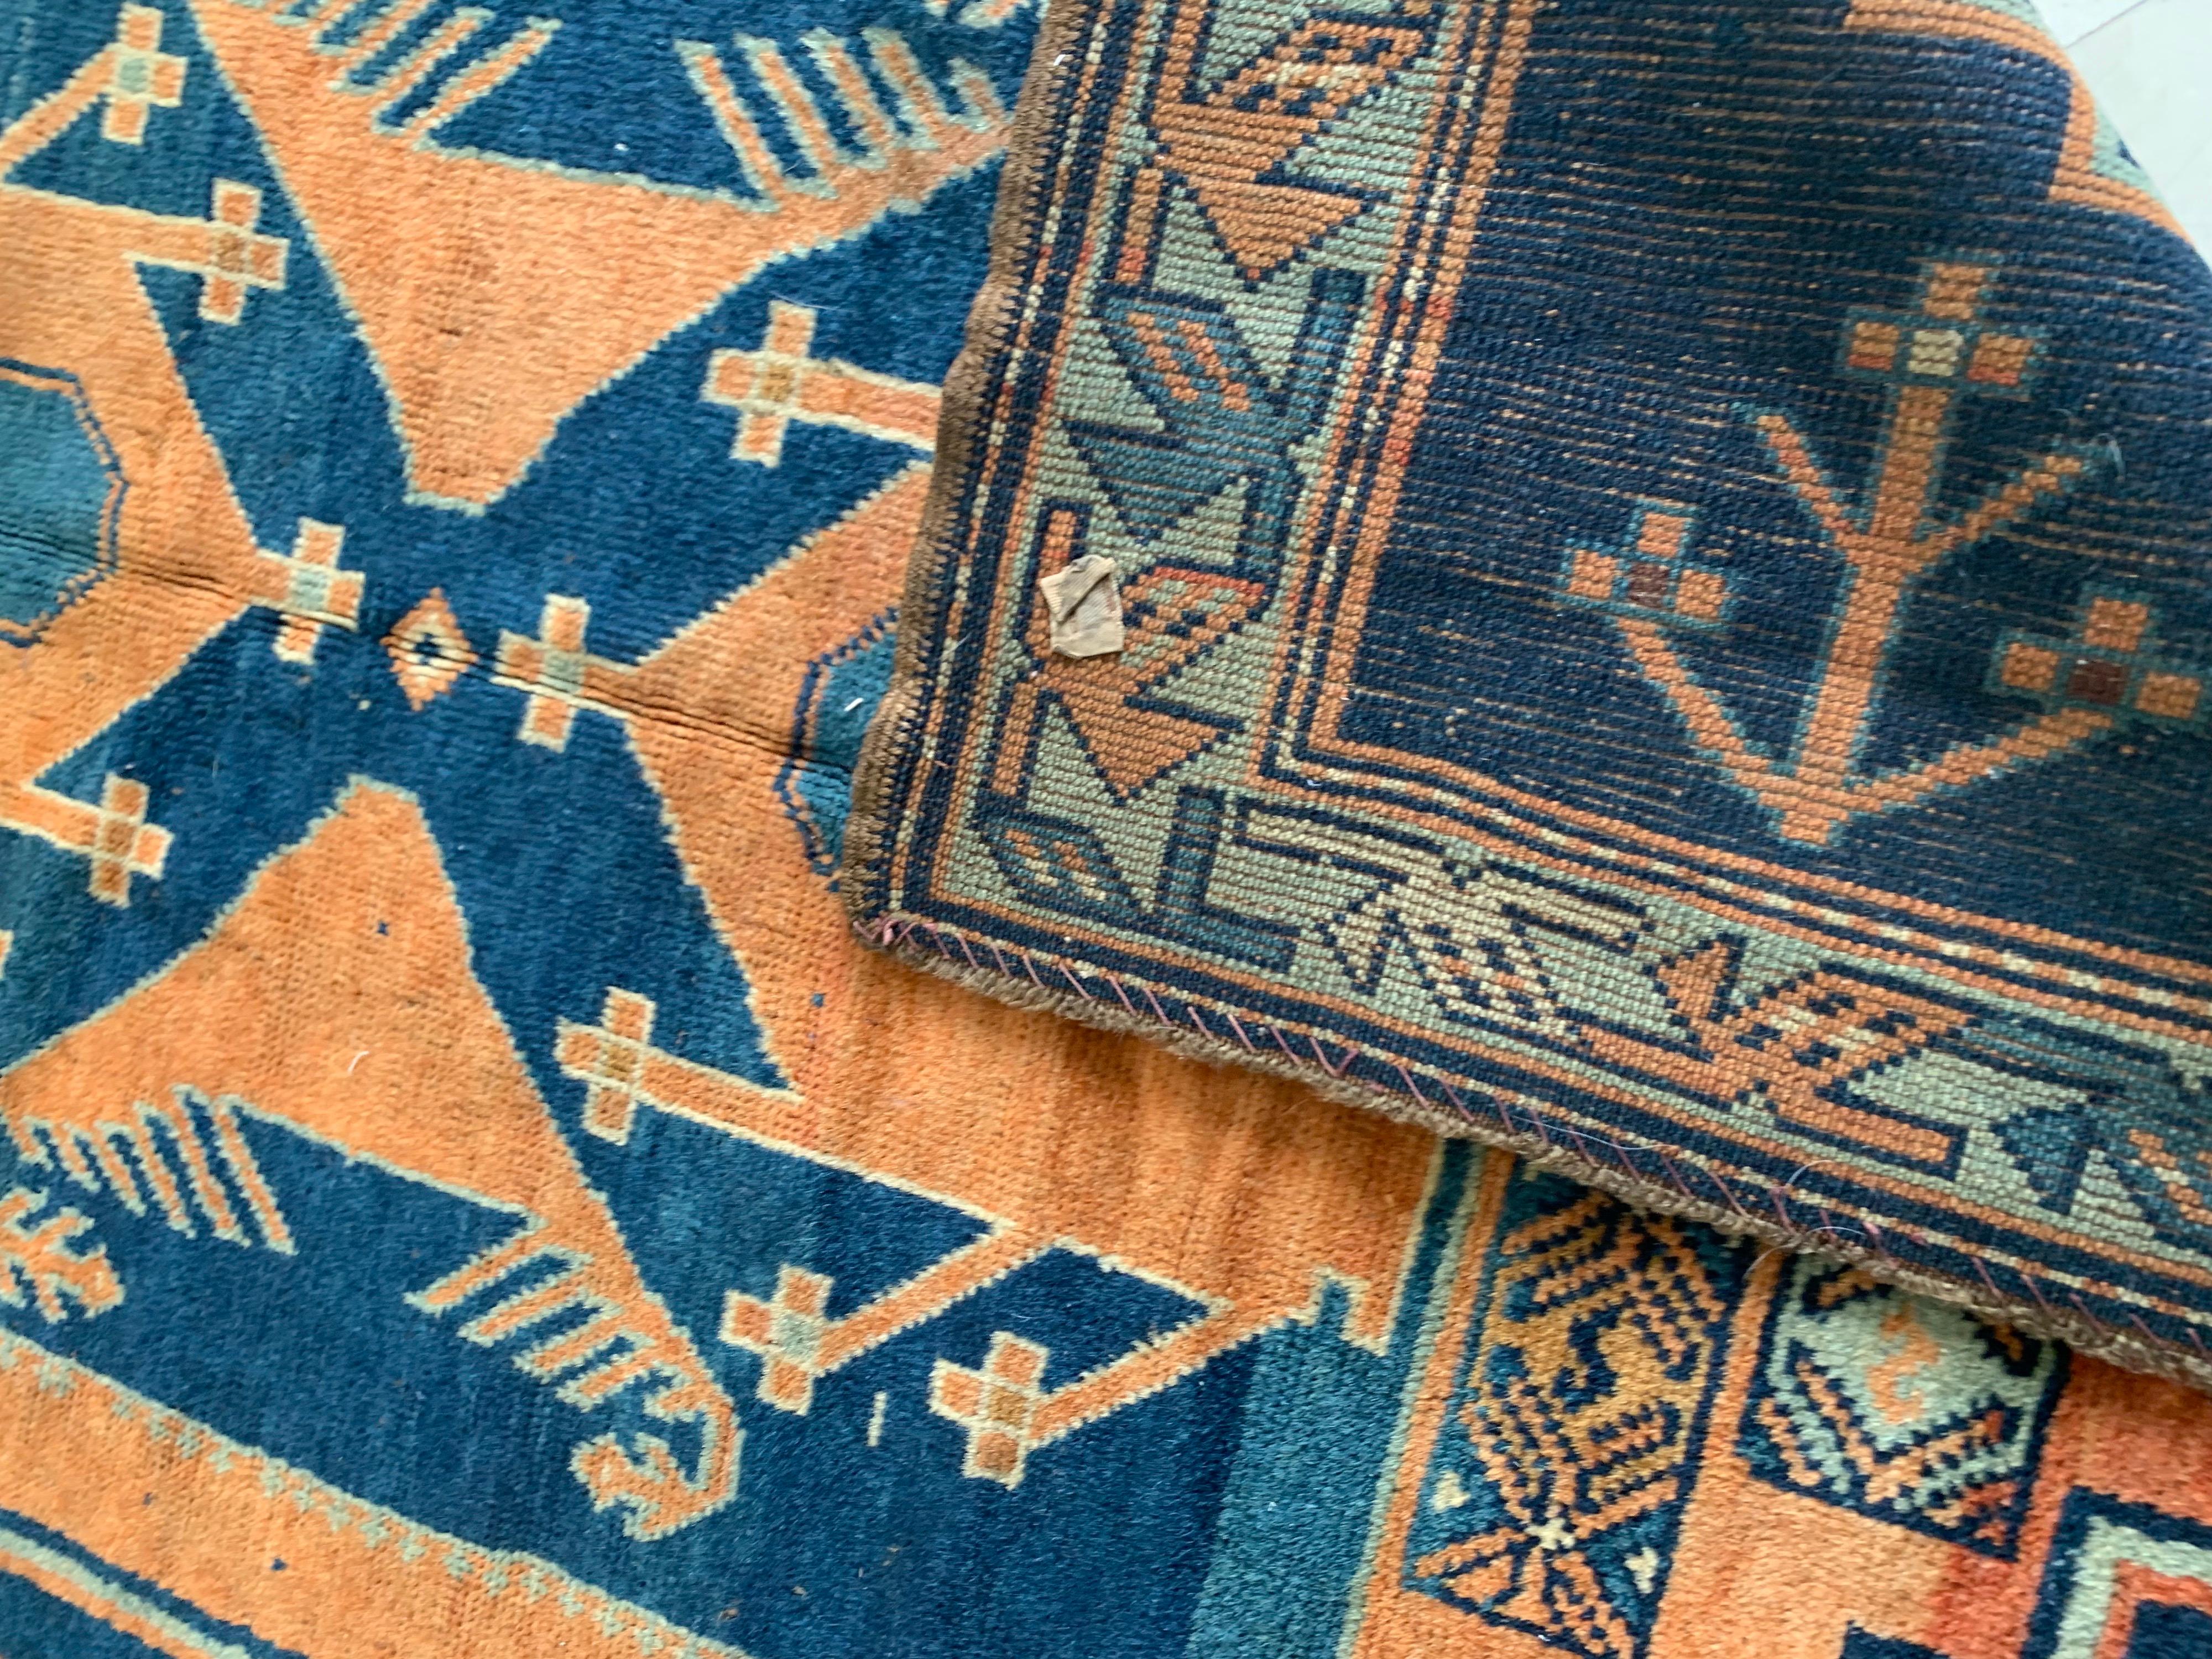 Antique Caucasian Orange and Blue Kazak Tribal Geometric Area Rug In Good Condition For Sale In New York, NY